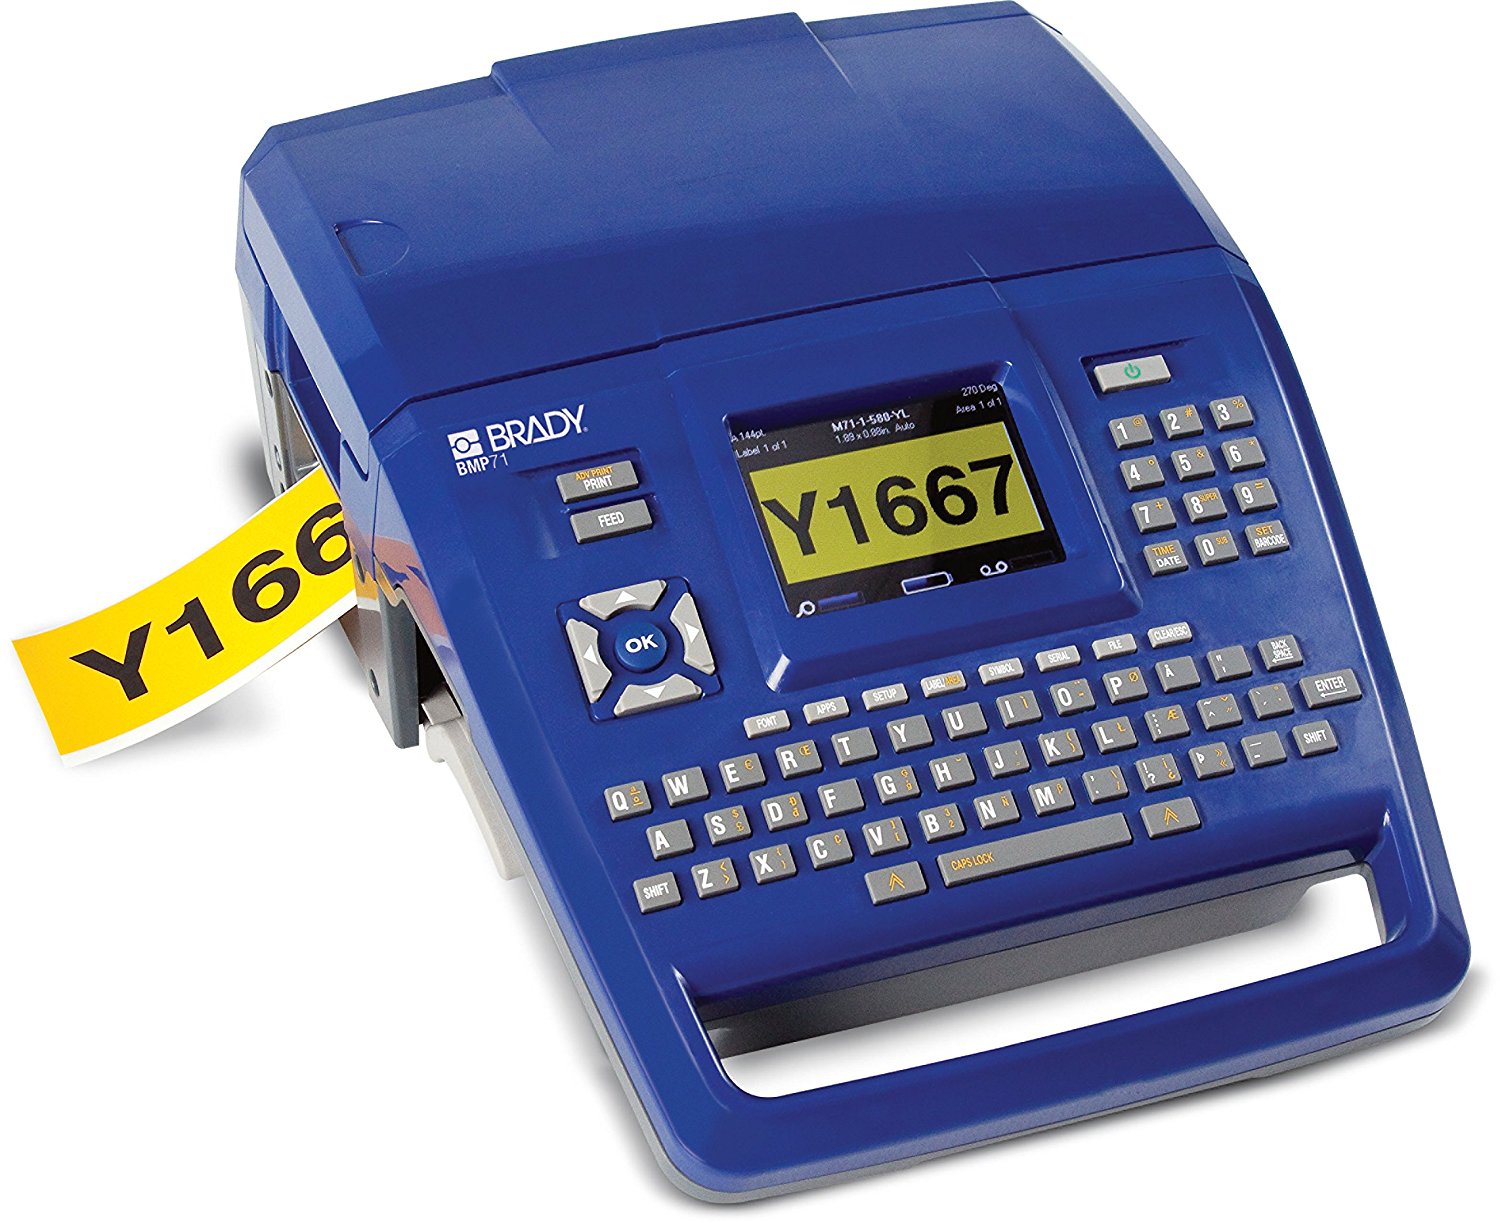 Brady BMP71 Label Printer with Quick Charger and USB Connectivity (BMP71-QC)